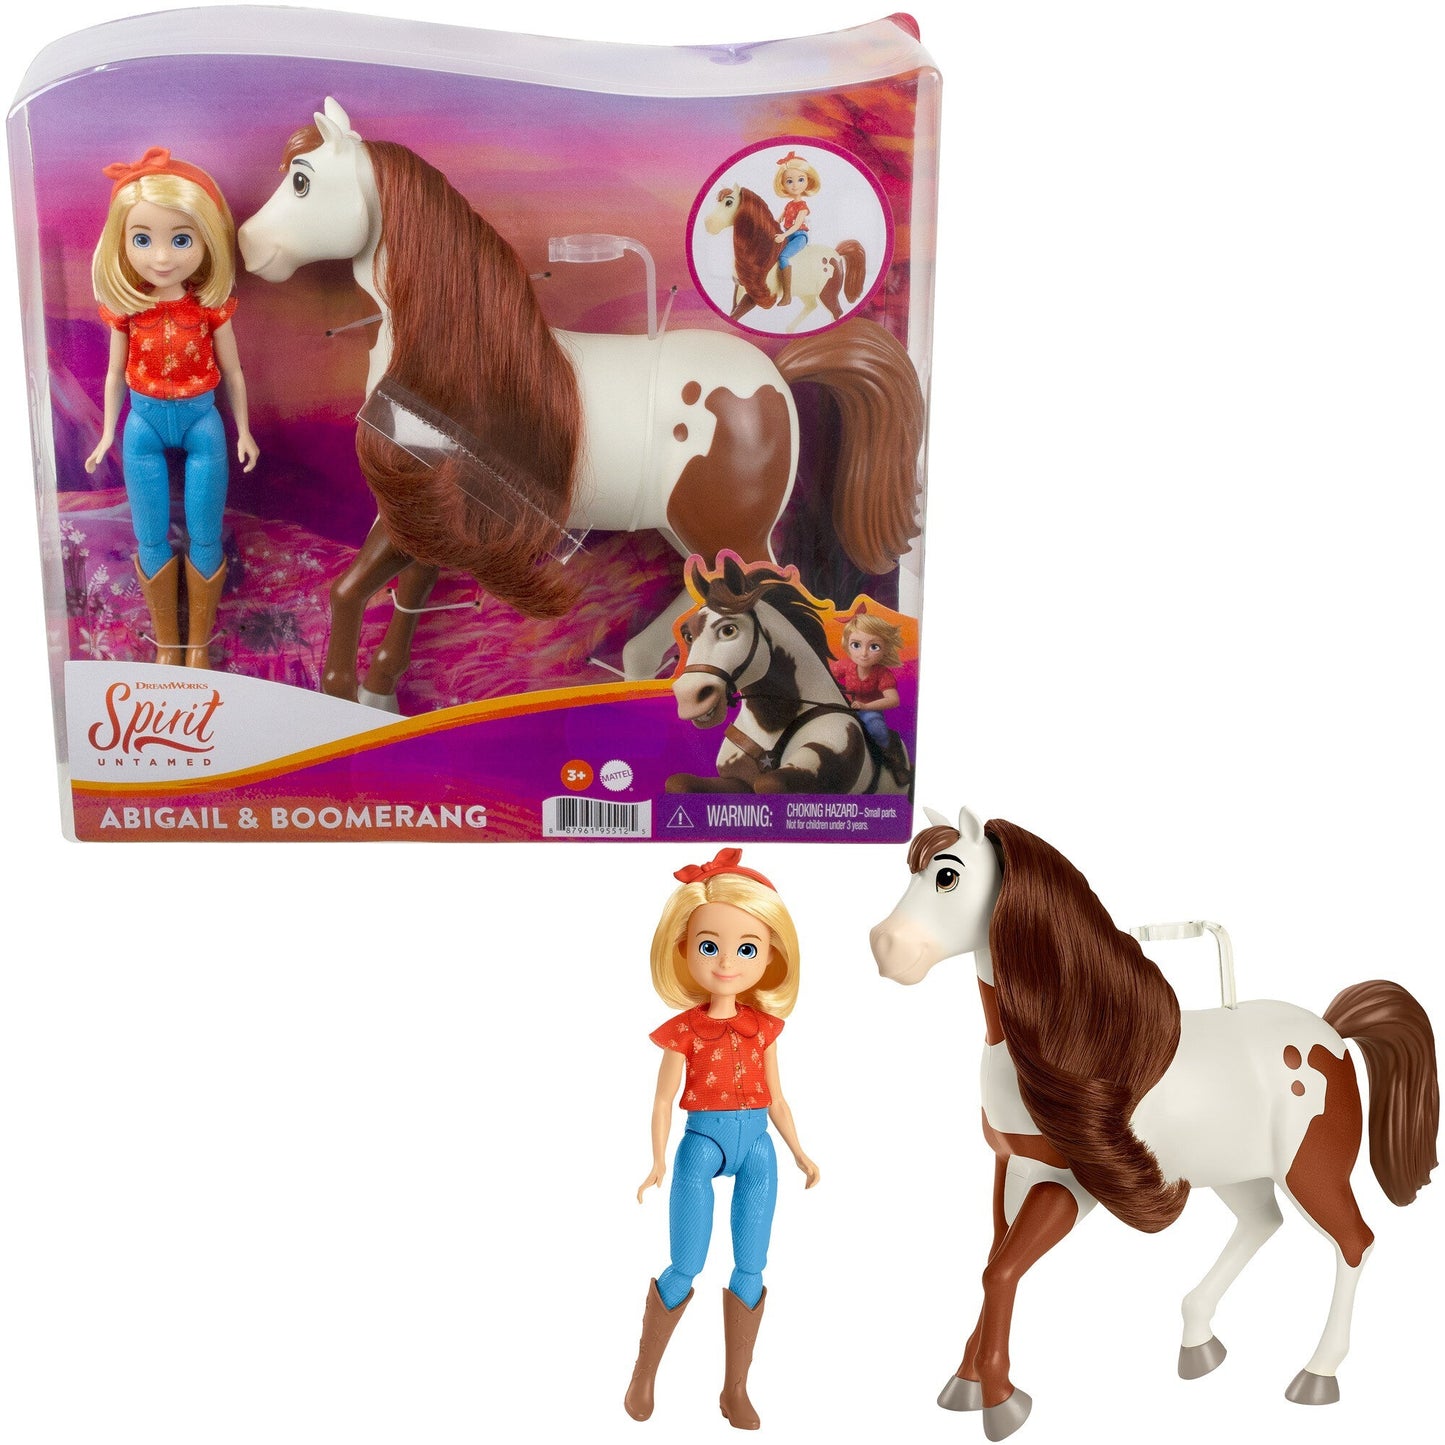 Spirit Untamed Abigail Doll (Approx.7-in) with 7 Movable Joints & Boomerang Horse (Approx.8-in) with Long Mane